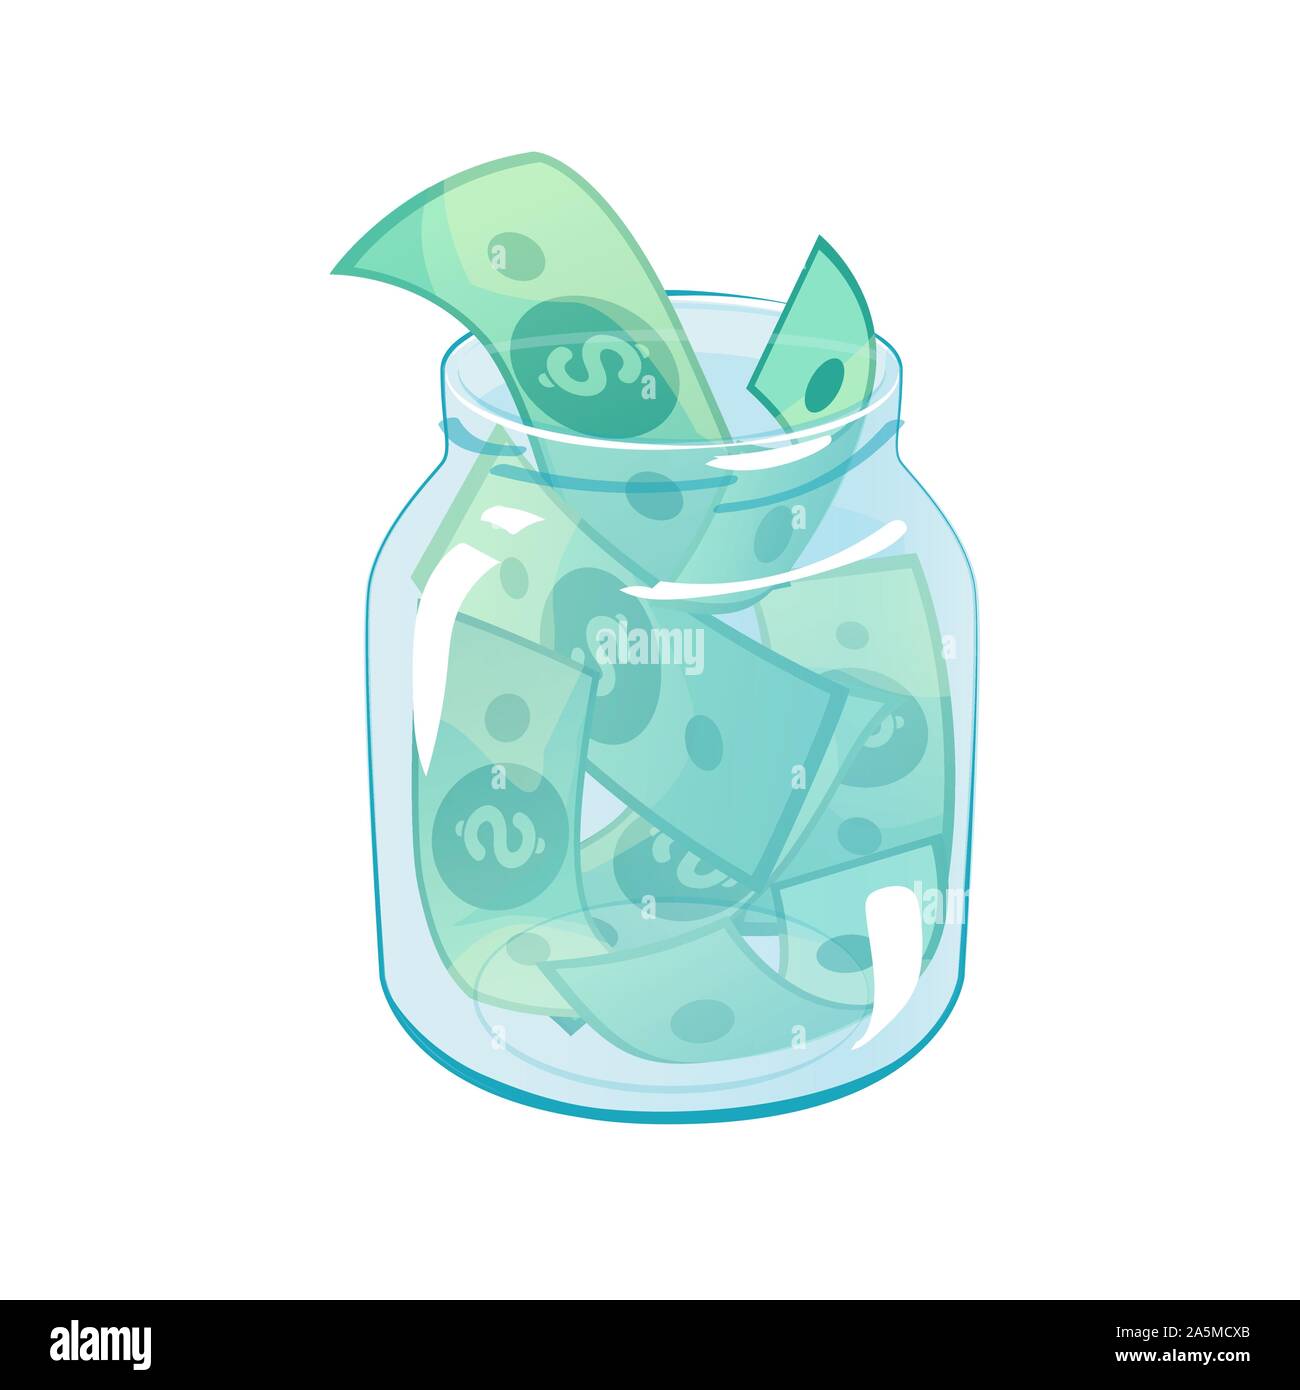 Glass jar with dollars. Financial investment concept. Save money in bank, banking security design. Cash savings in bottle. Charity, donation vector illustration template isolated on white background. Stock Vector